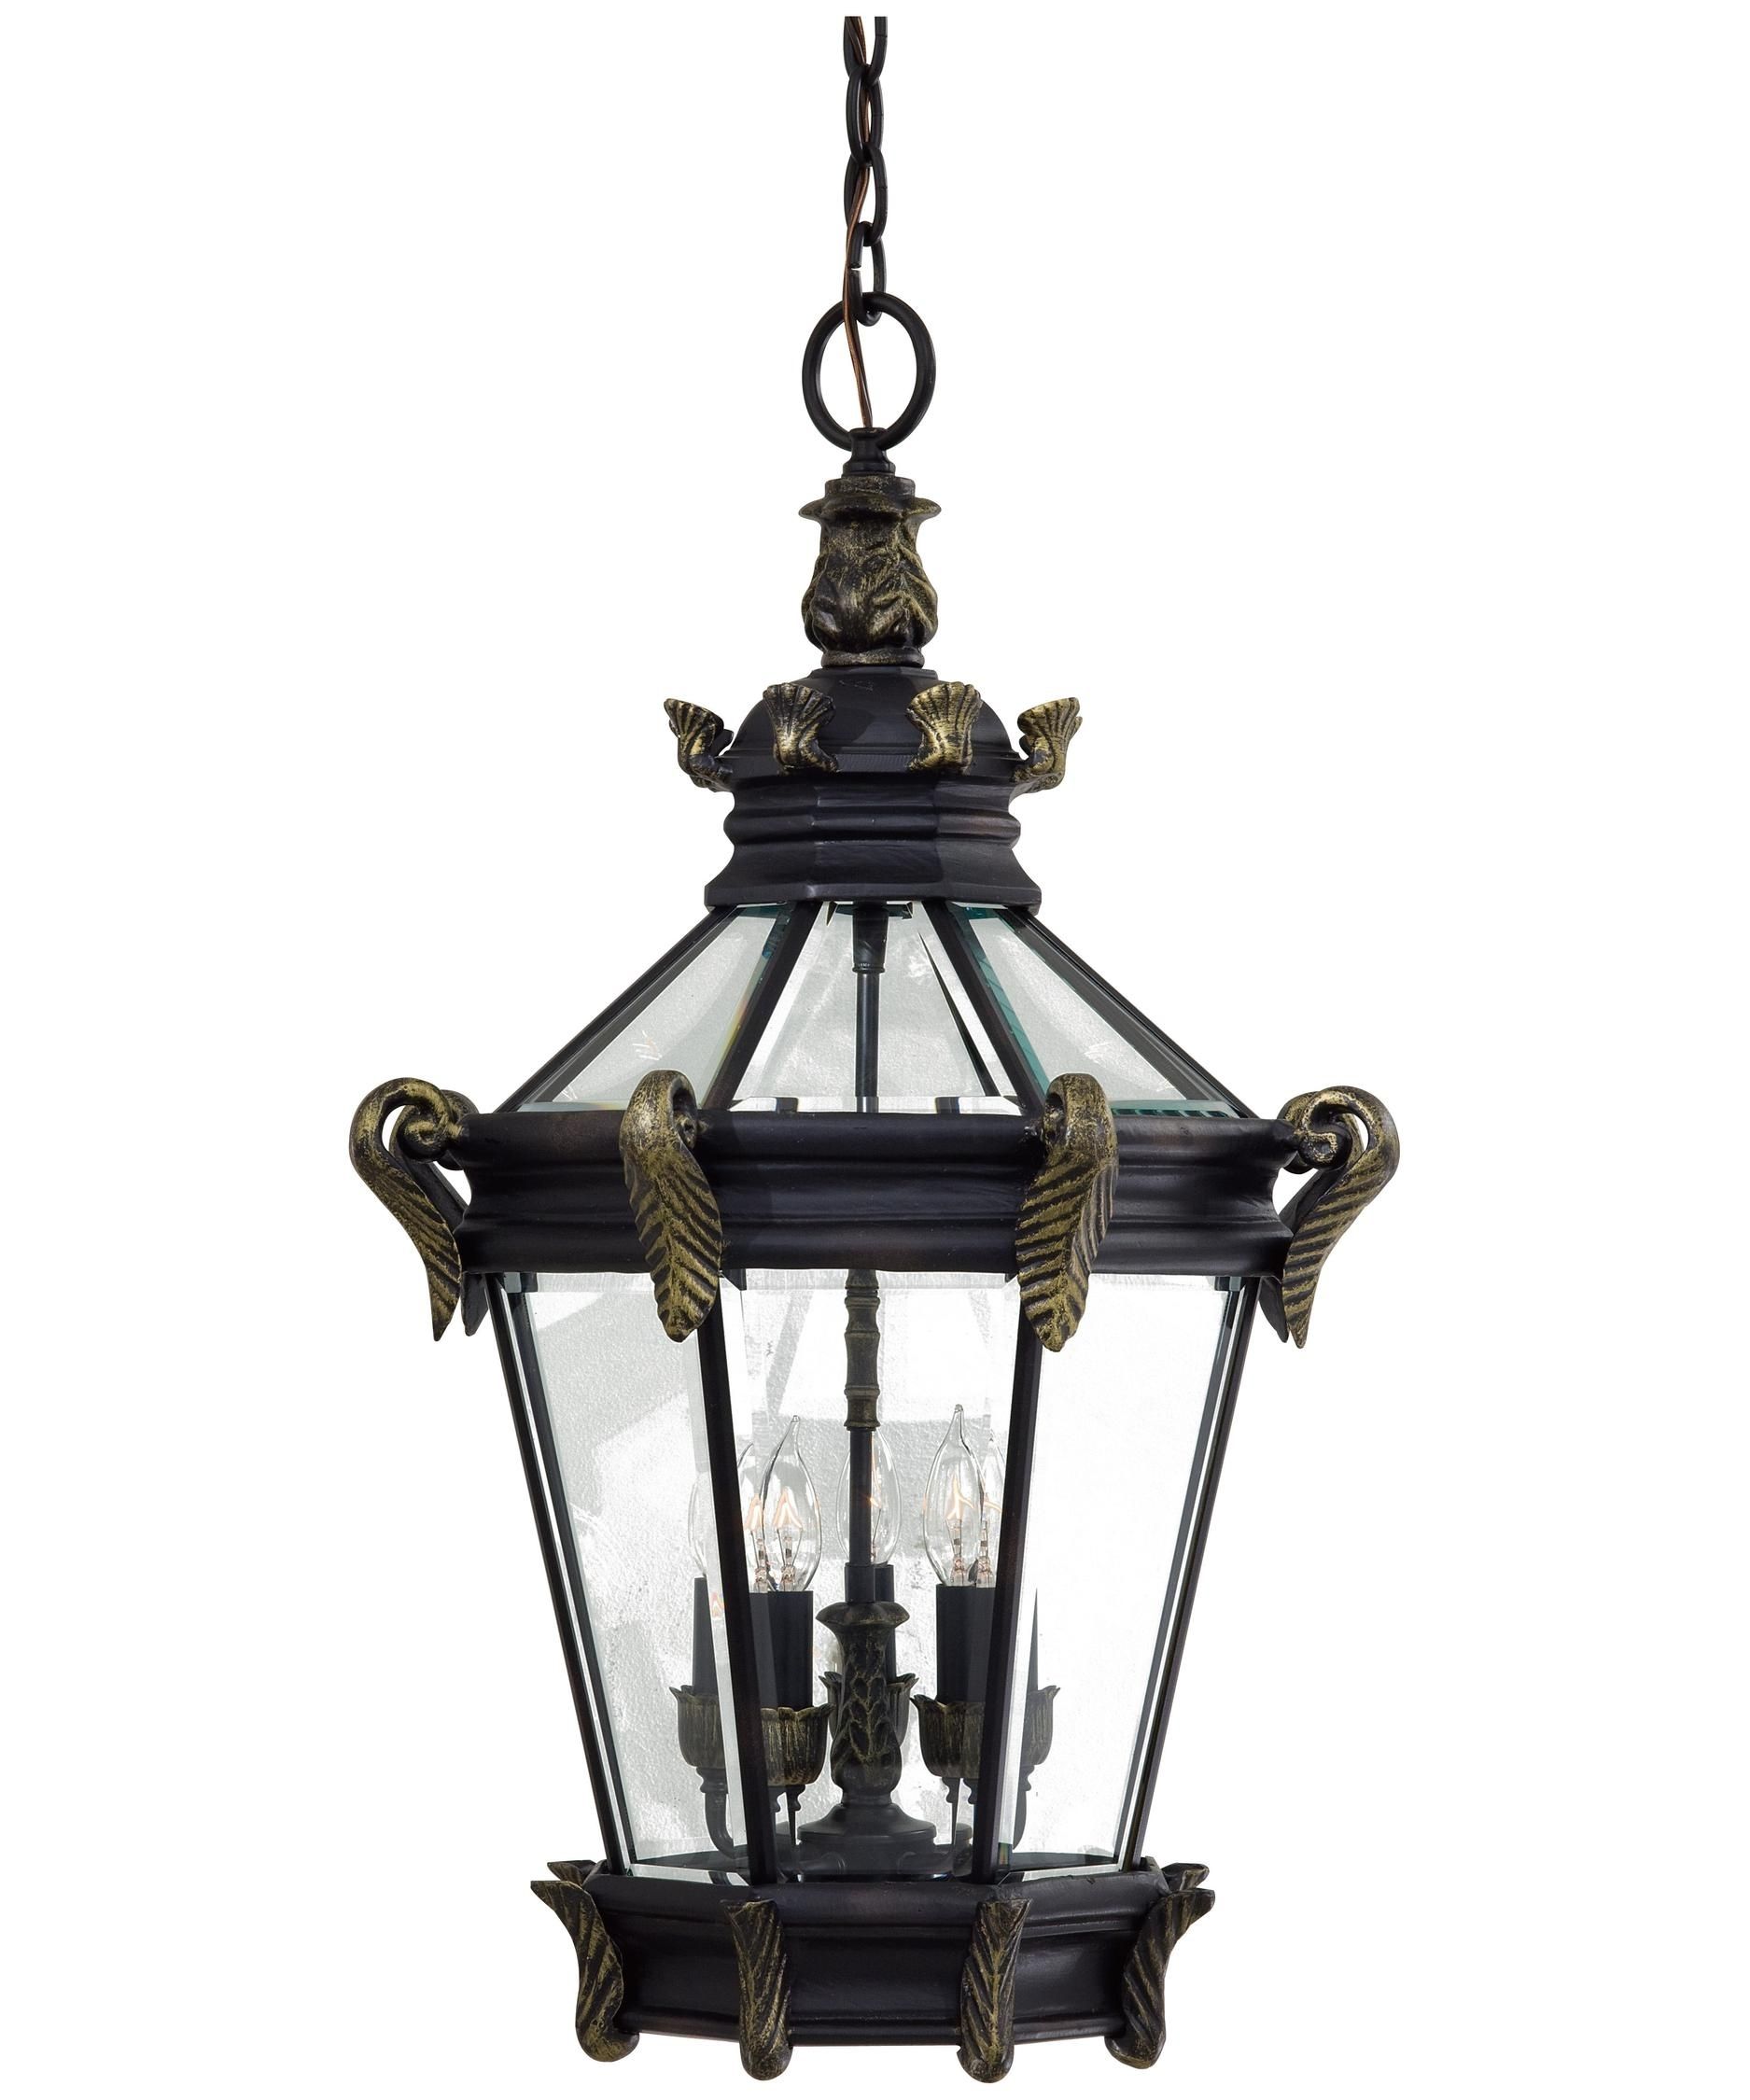 Minka Lavery 8934 Stratford Hall 19 Inch Wide 5 Light Outdoor With Regard To Gold Outdoor Lanterns (View 11 of 20)